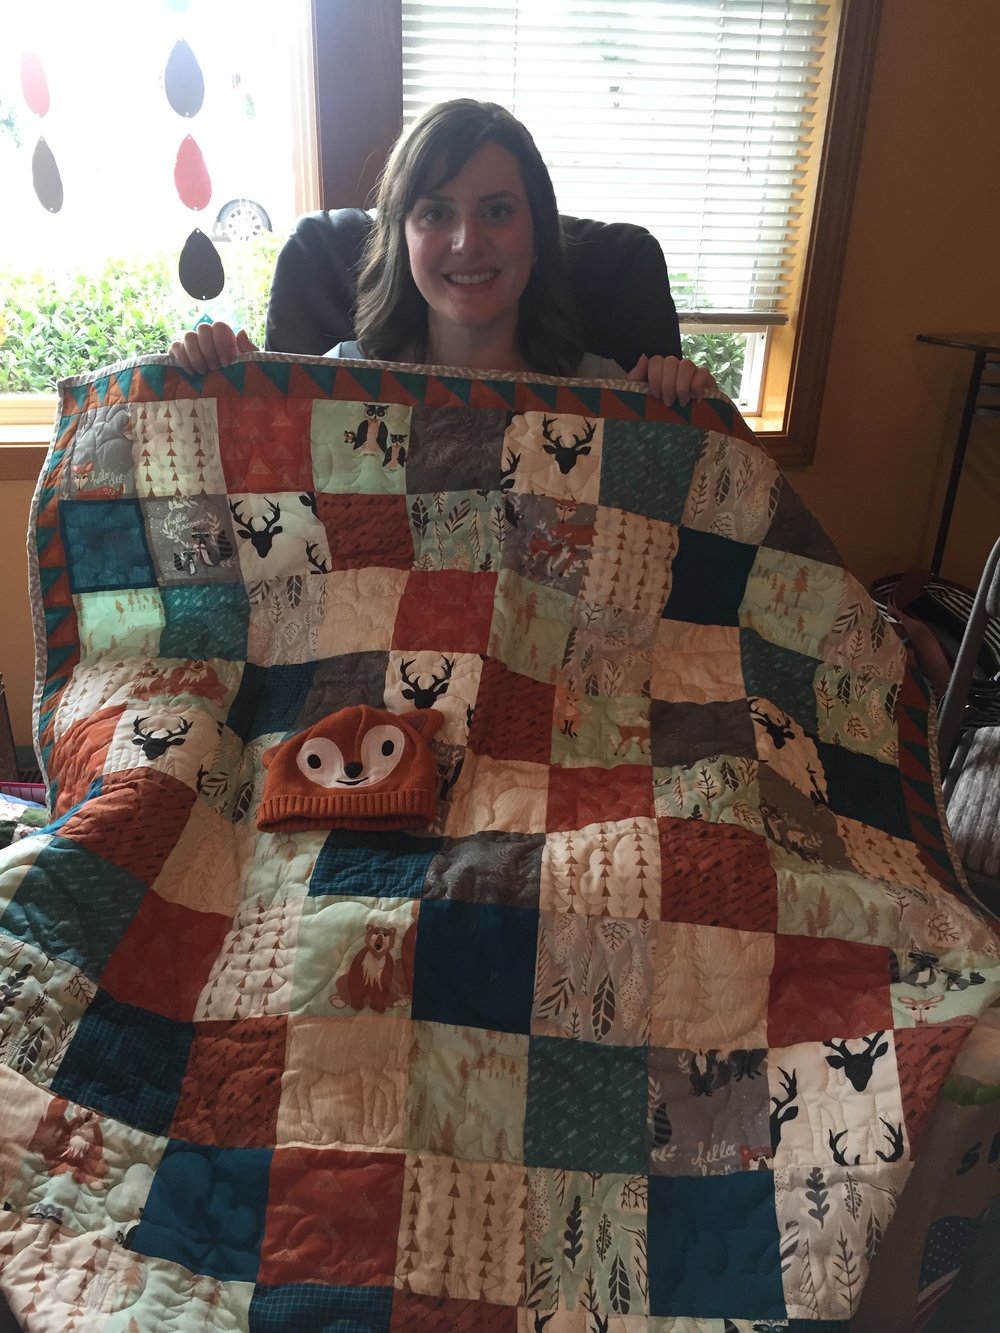  We were given many thoughtful gifts, including this amazing quilt from Talley!&nbsp; 